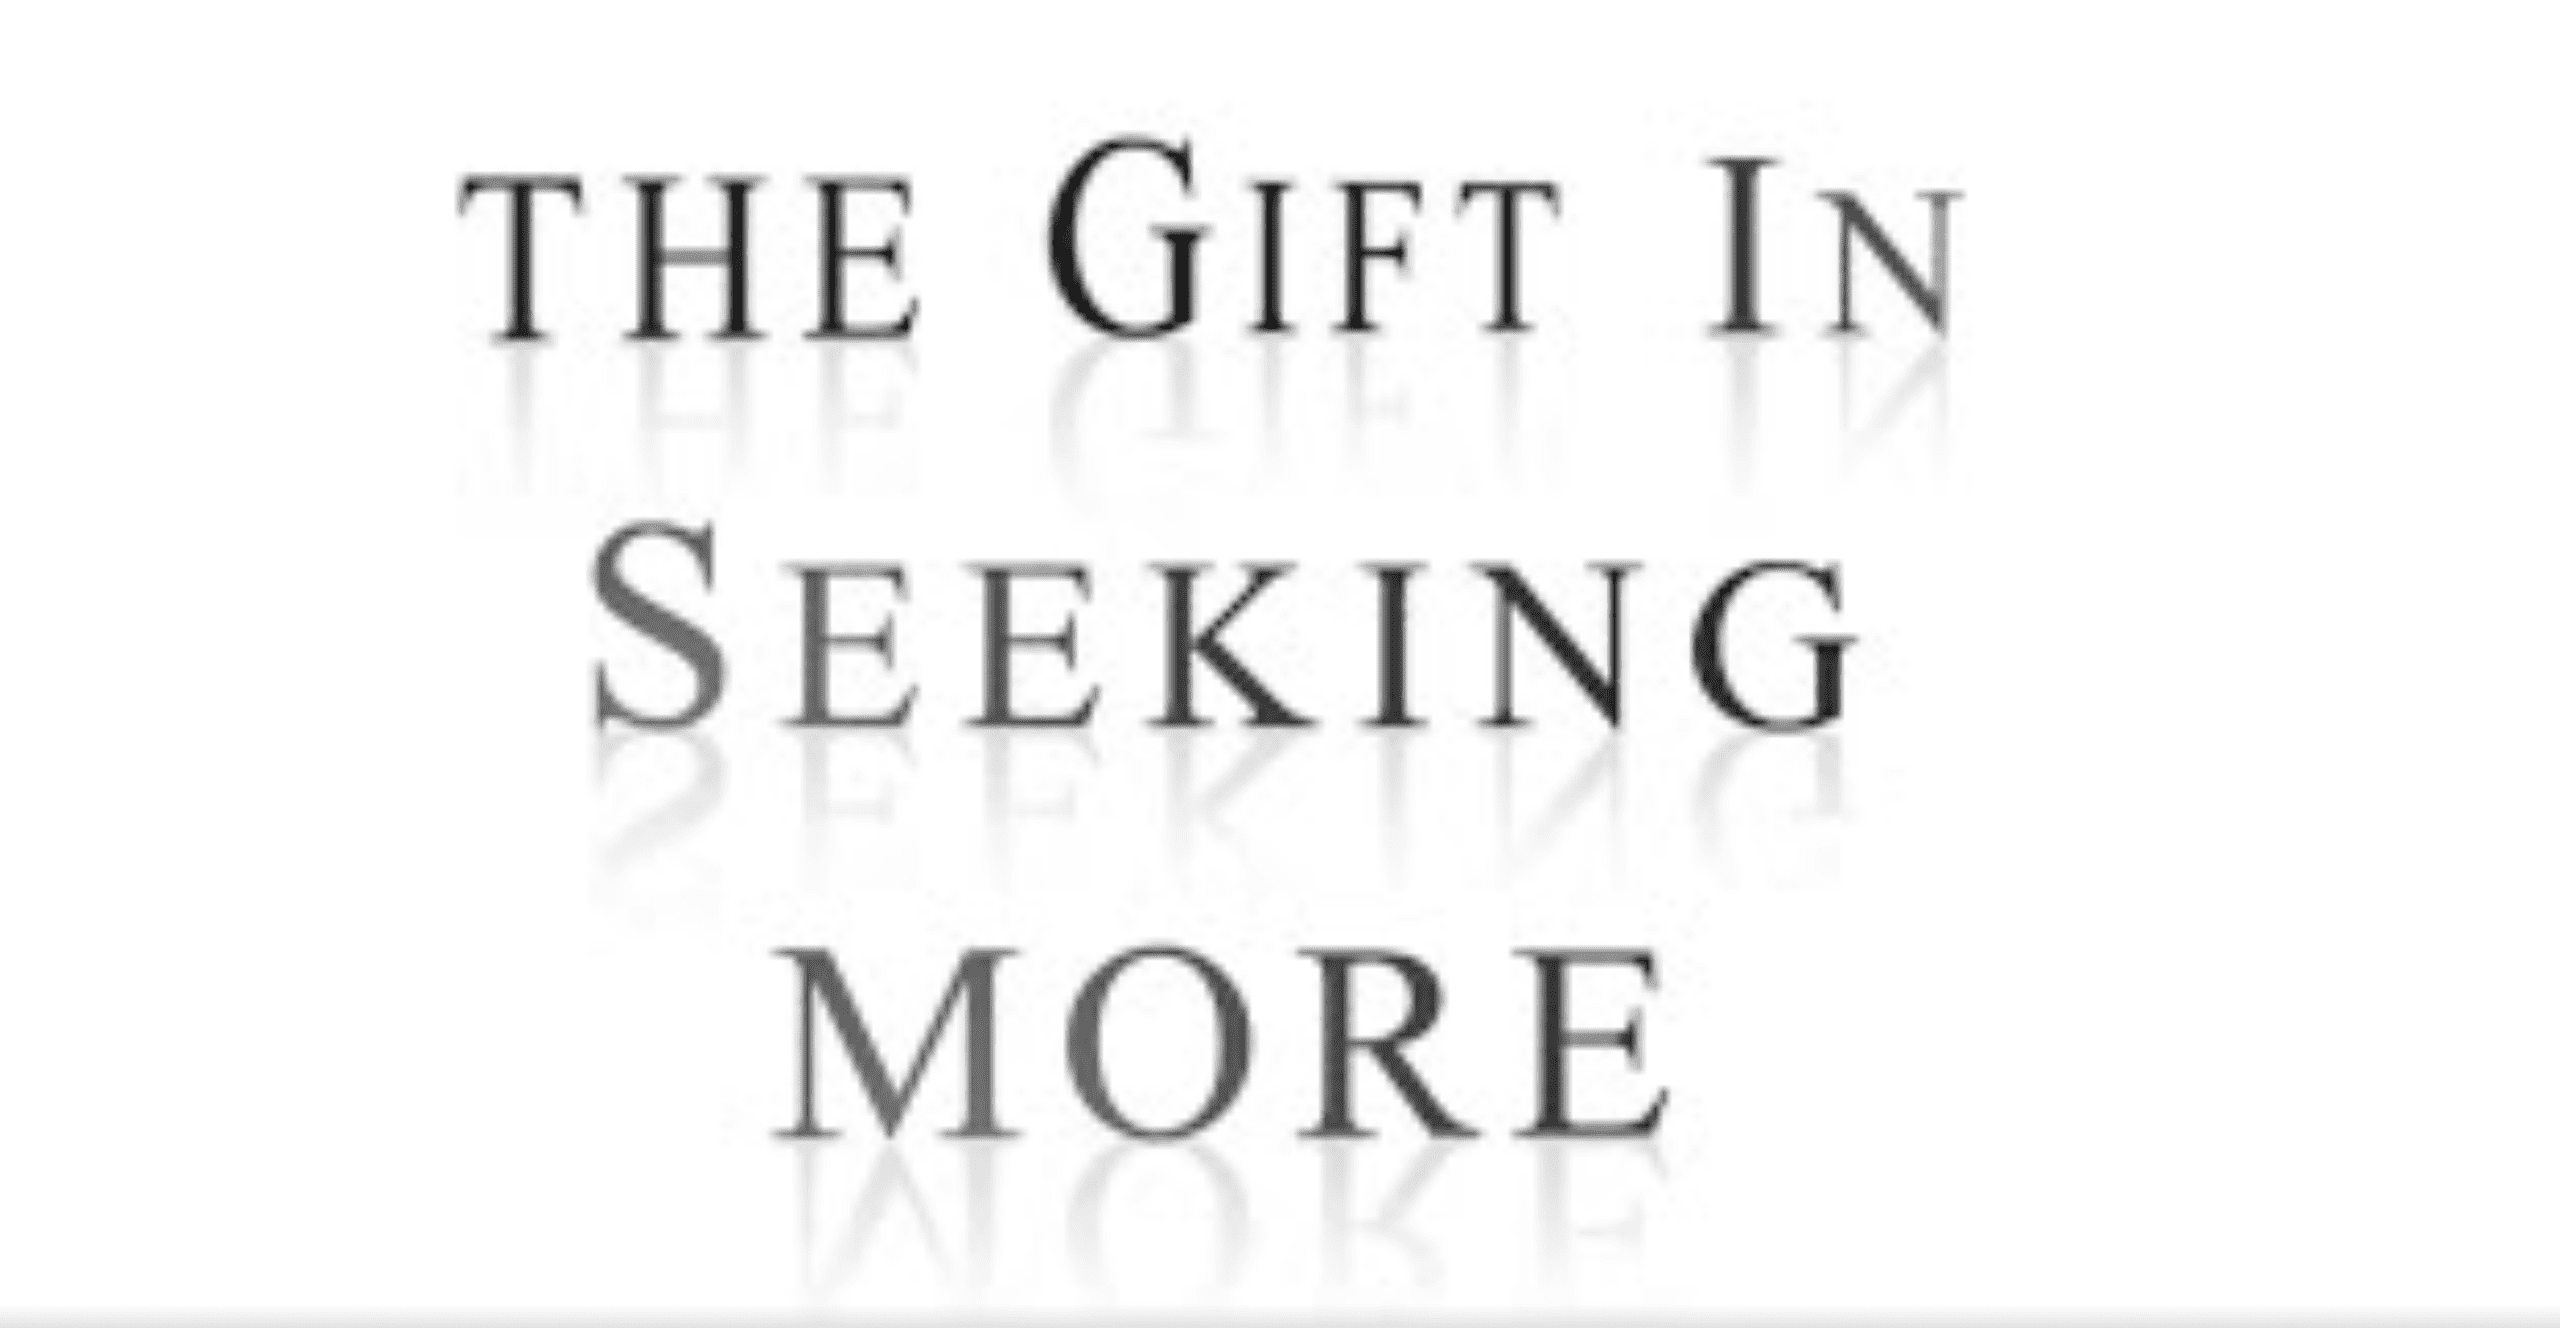 find the gift when seeking more